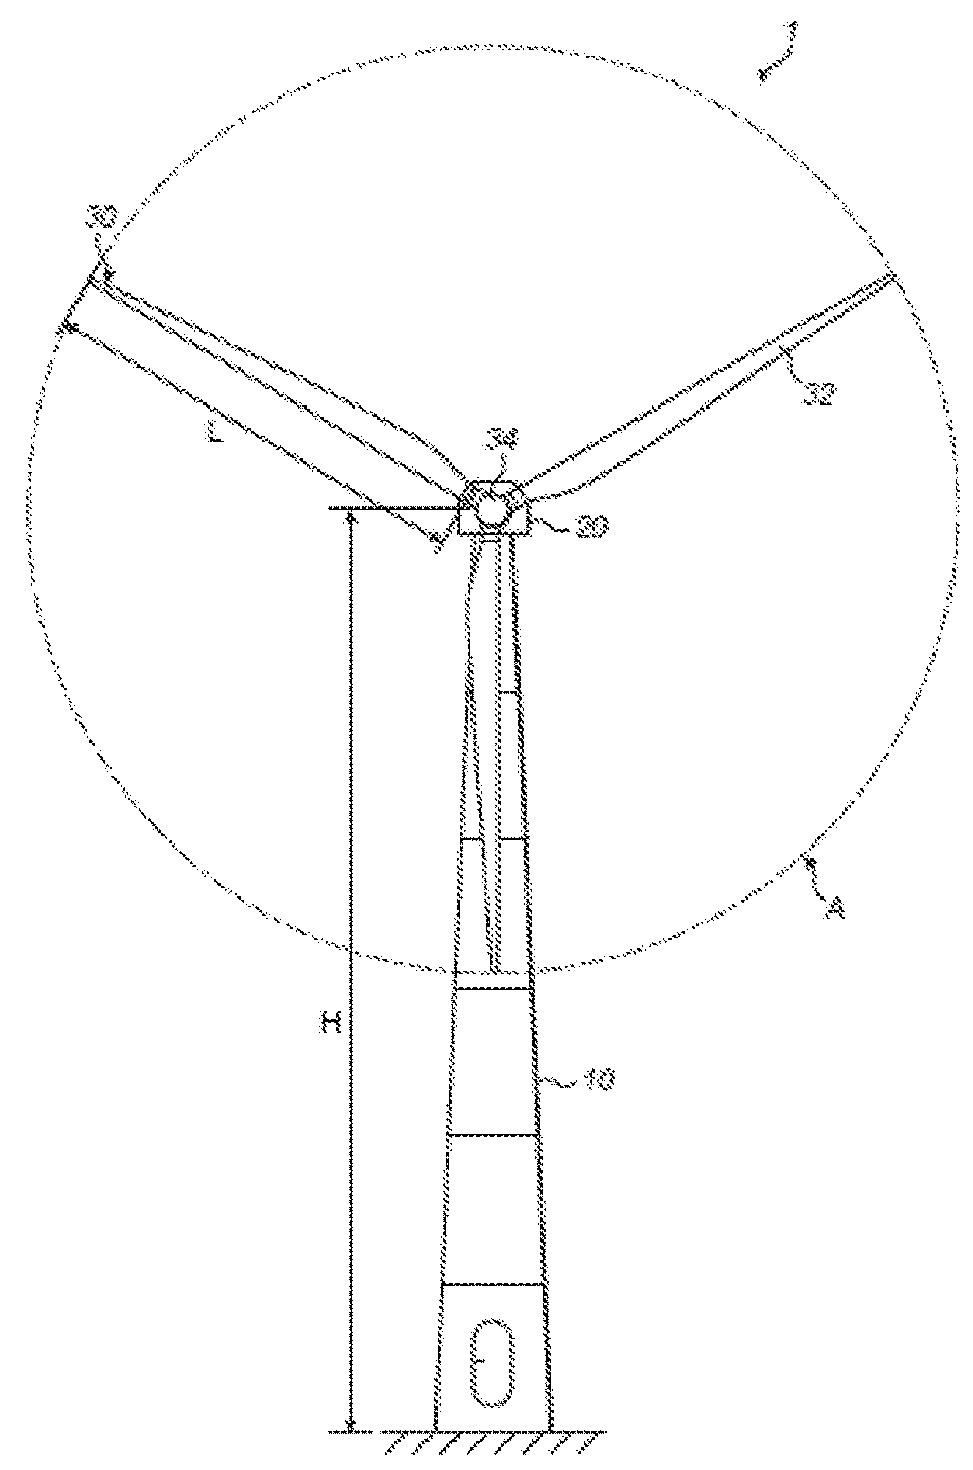 Initialisation of wind turbine control functions